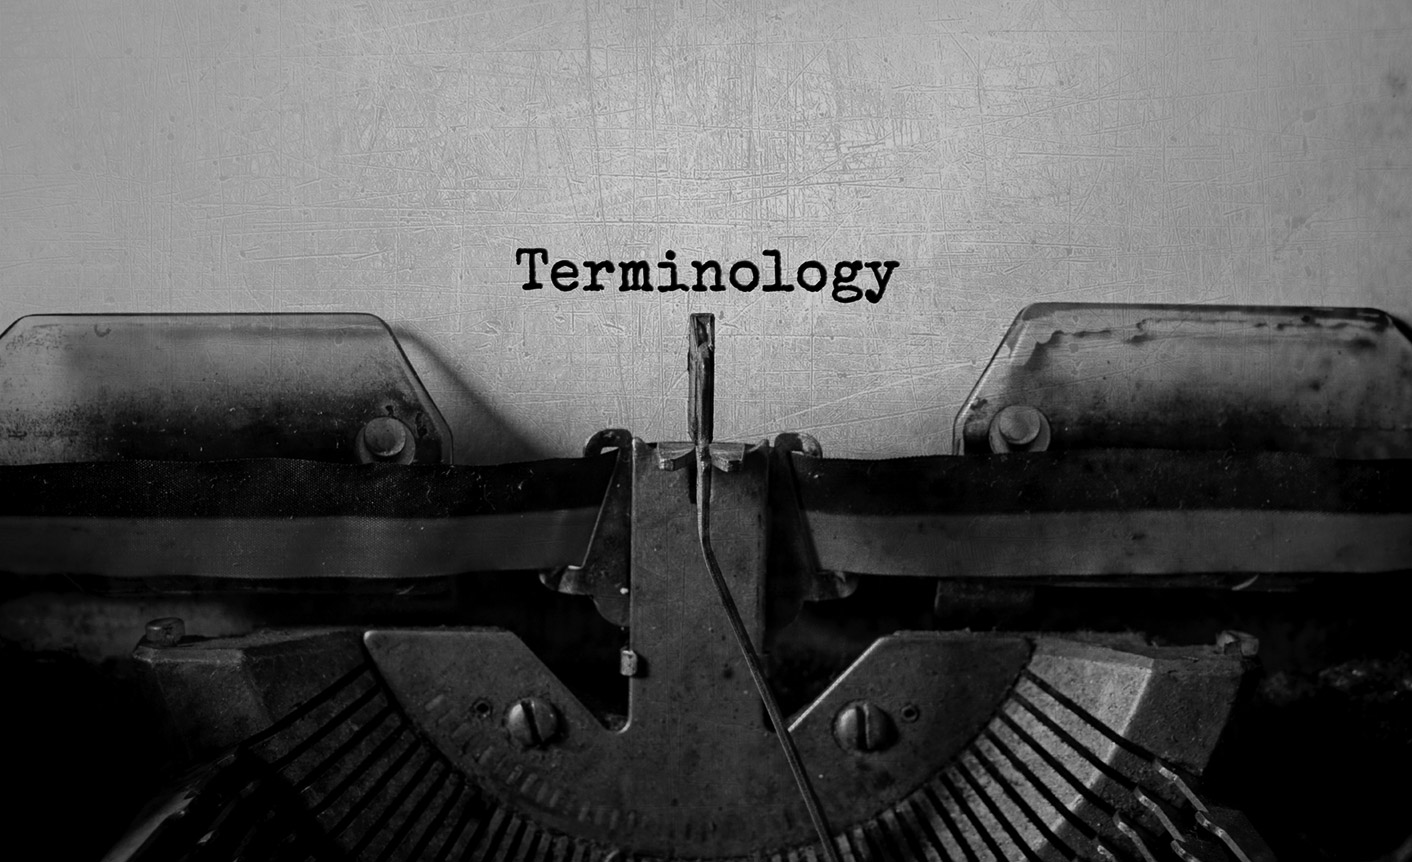 Terminology-Putting-the-Concept-Into-Practice